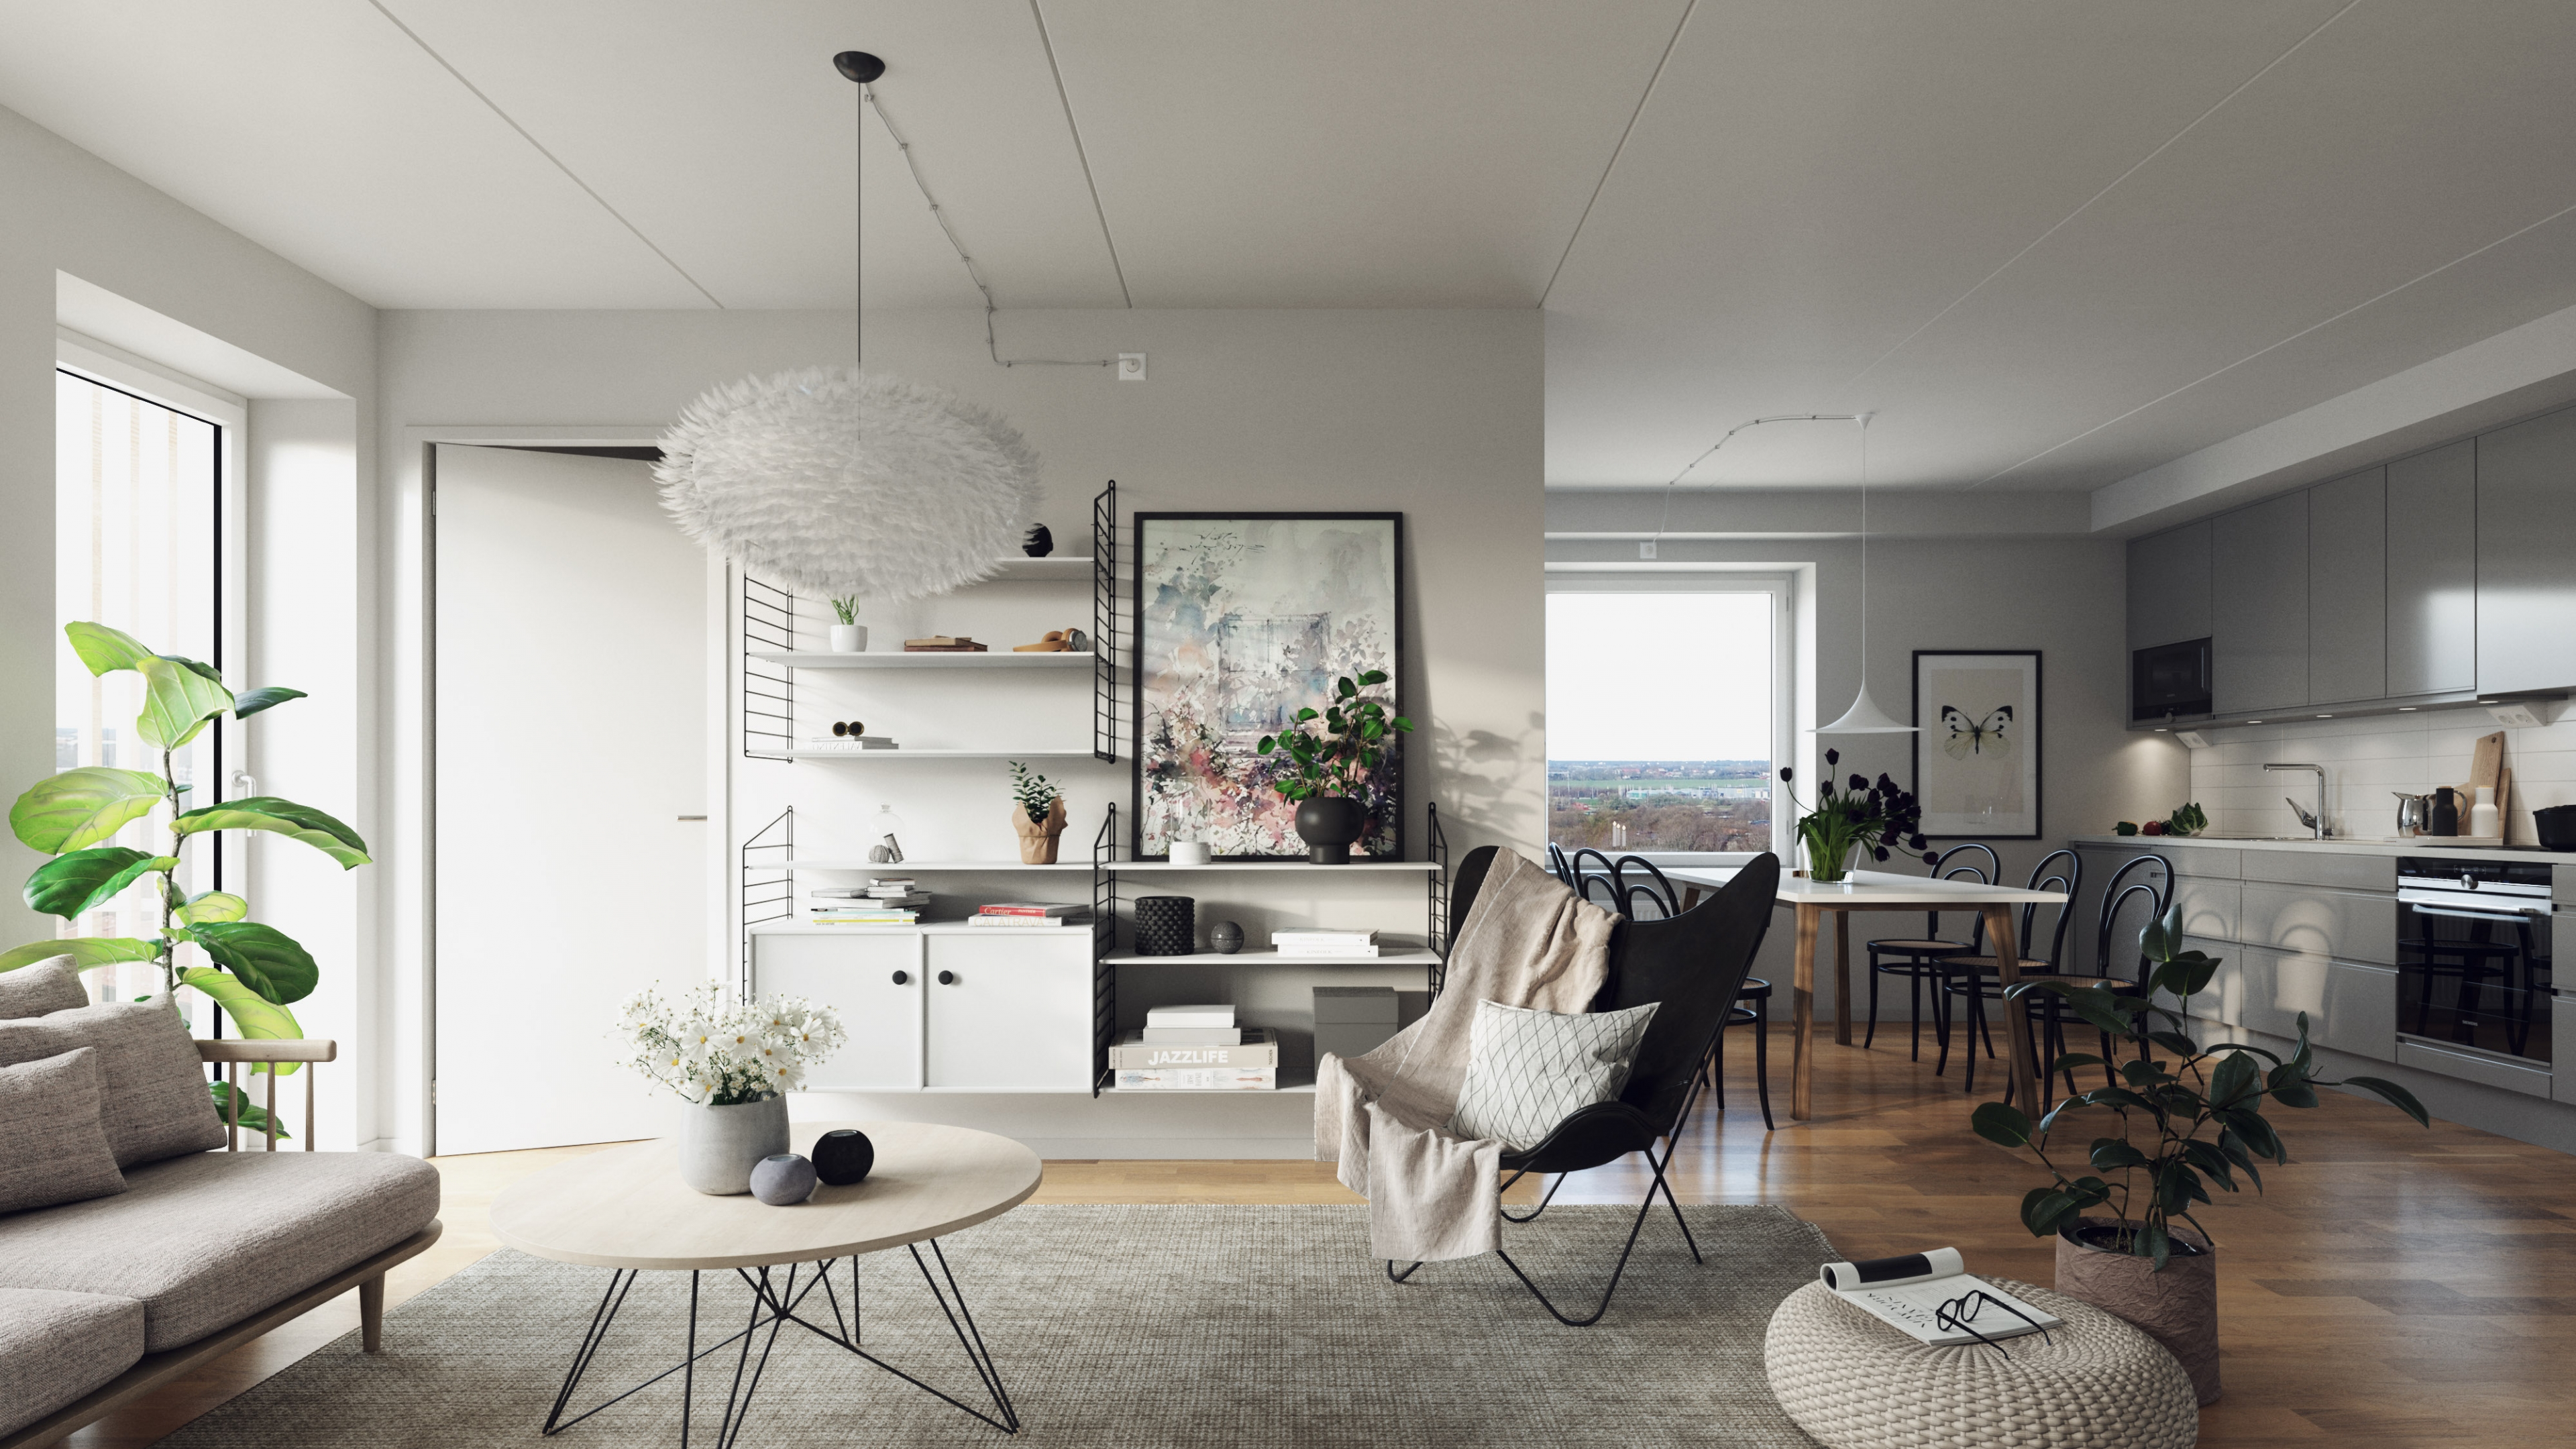 Architectural visualization of Gröna Lund for Veidekke. A image of the interior of a residential building in daylight.